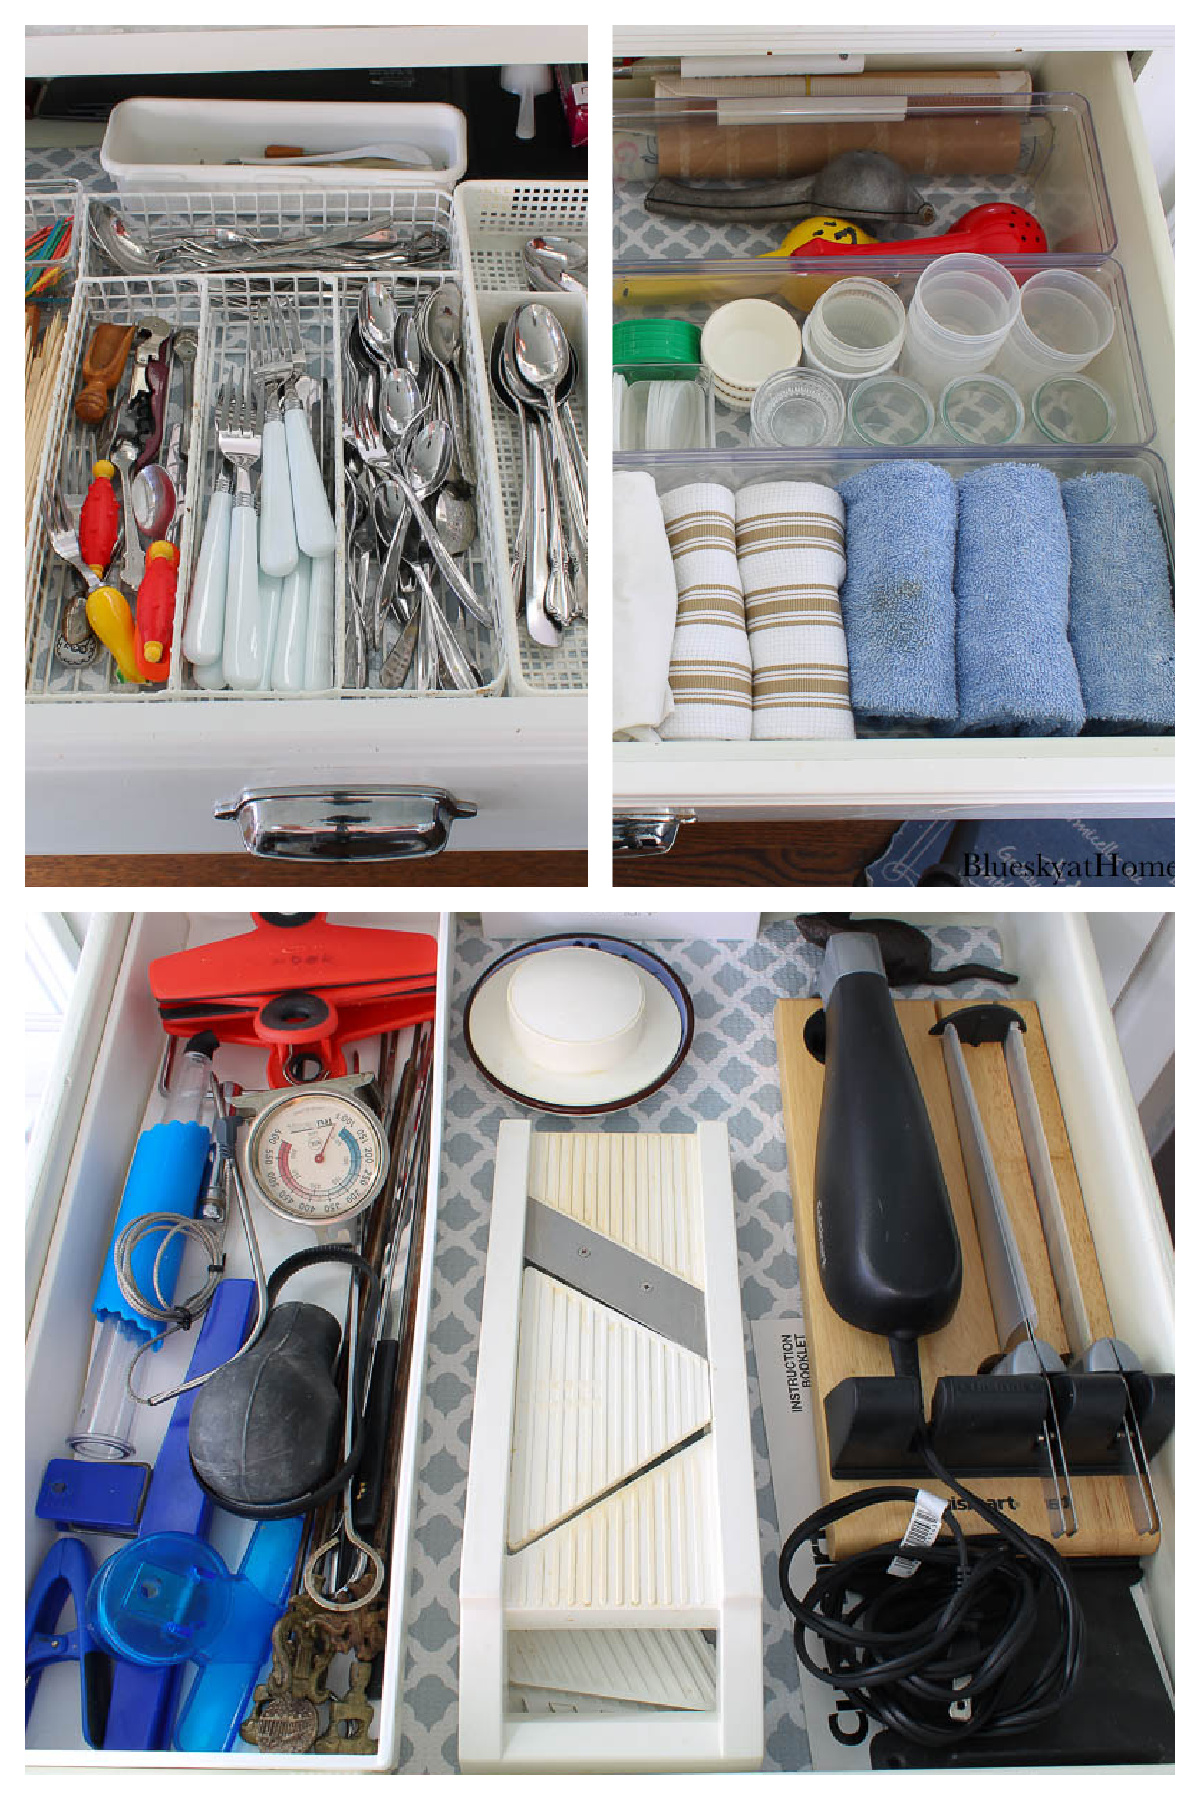 10.5 In. W X 21.5 In. D Wire Pull-out Pantry Drawer Cabinet Organizer :  Target